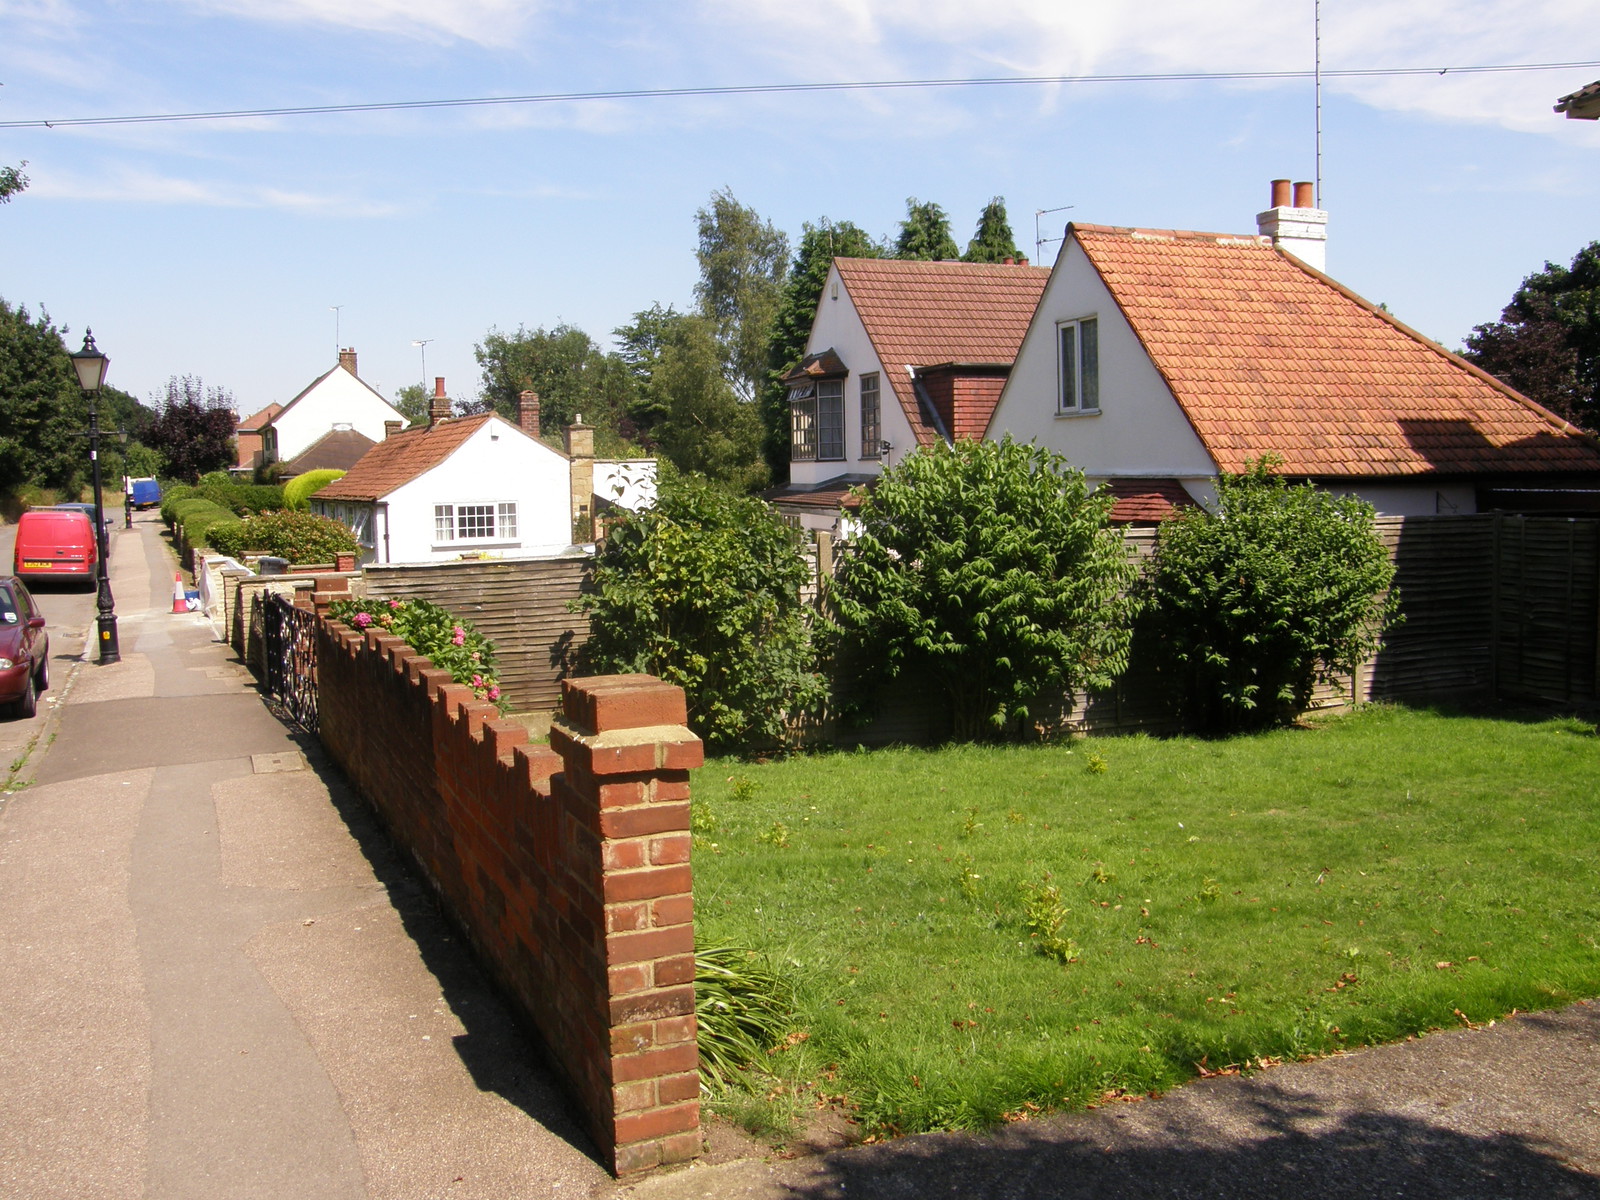 Houses along Bell Common